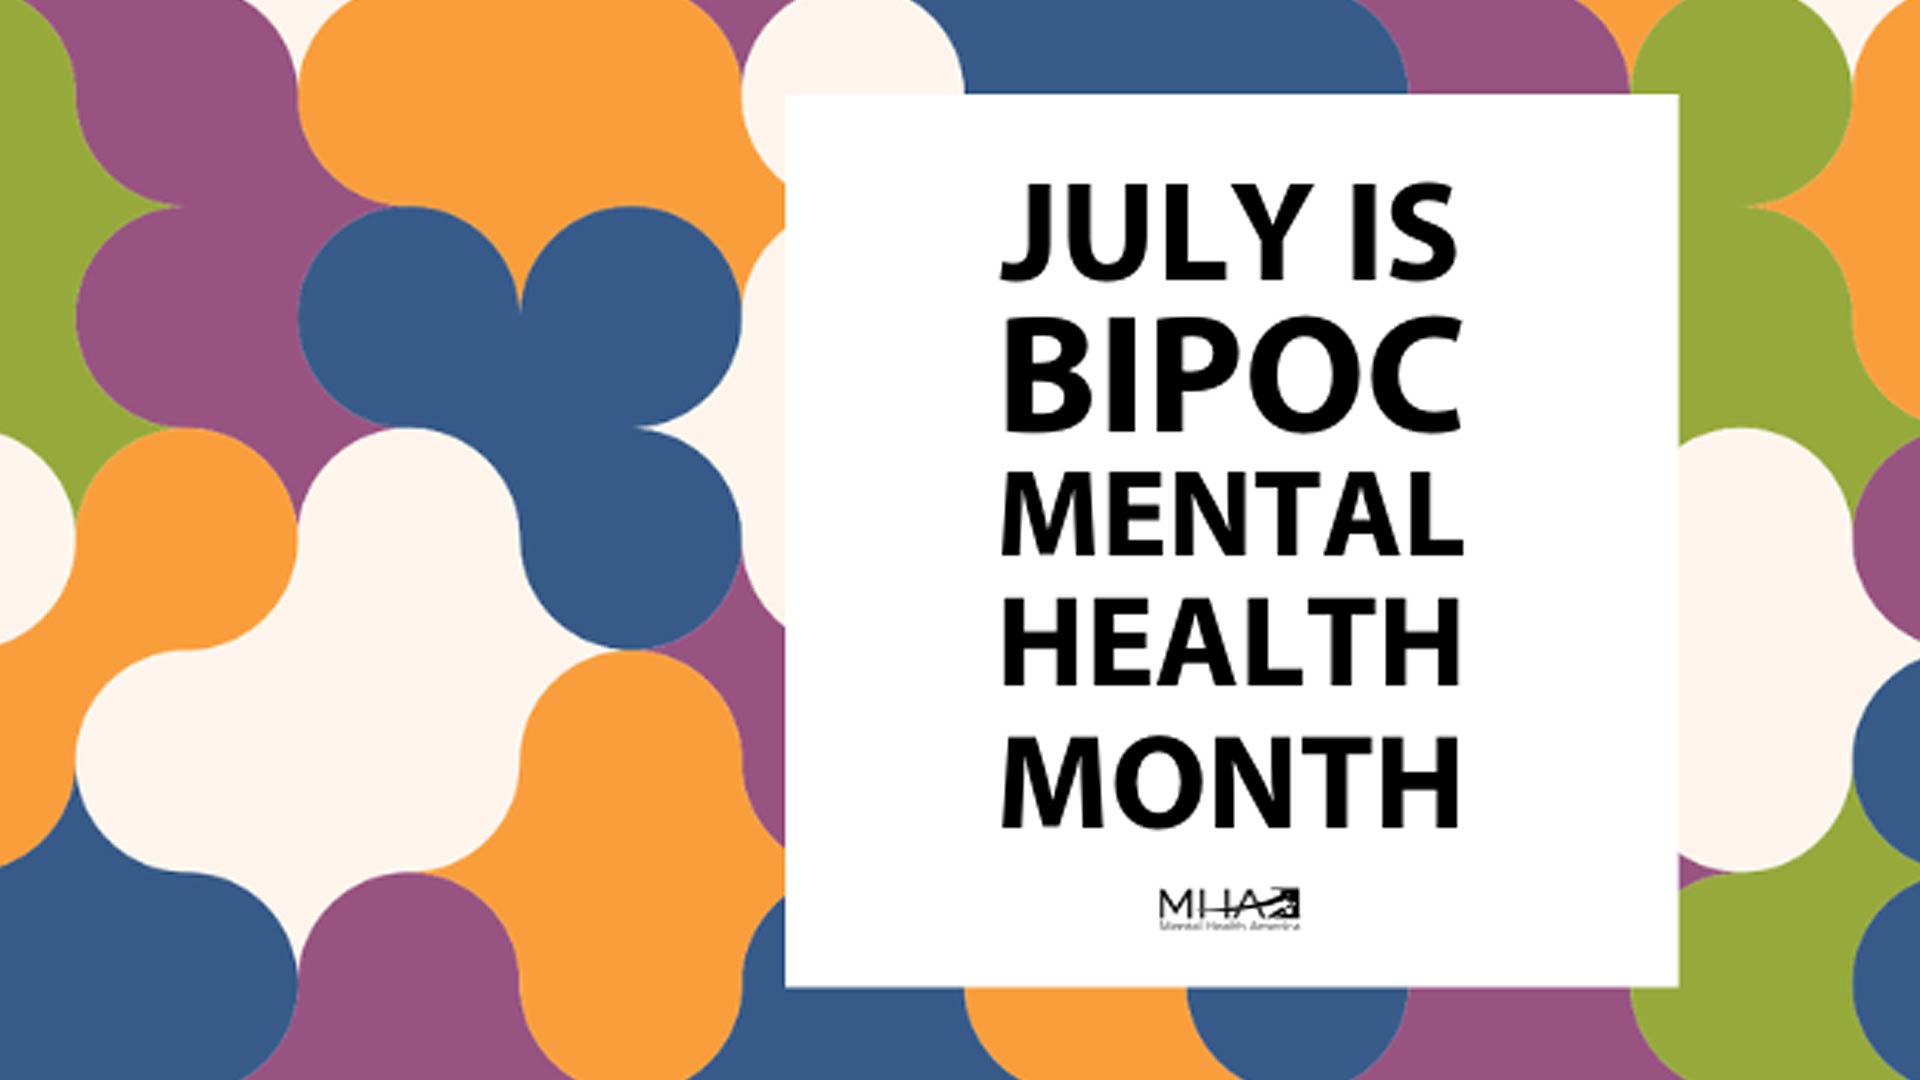 A Statement on Bipoc Mental Health Month From Jefferson Center CEO